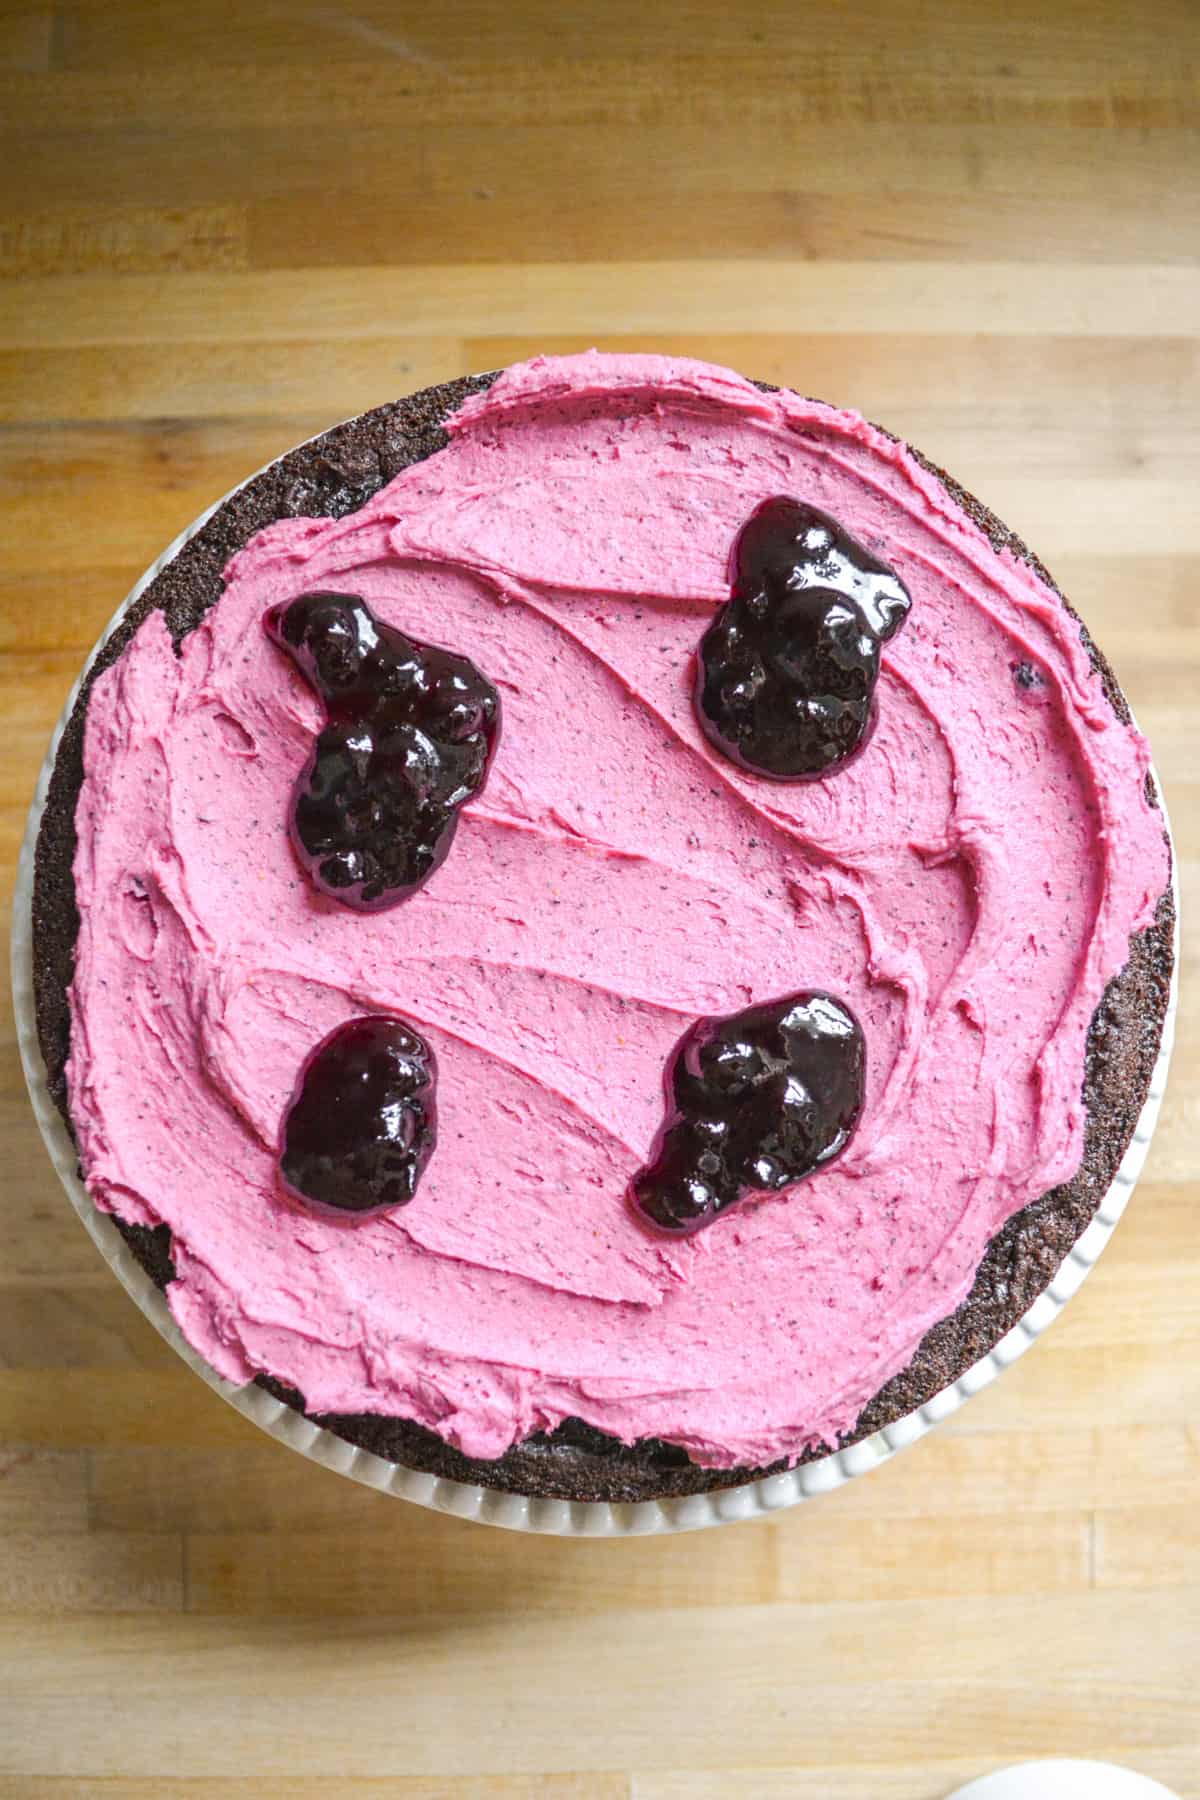 Chocolate cake topped with blueberry frosting and blueberry jam.